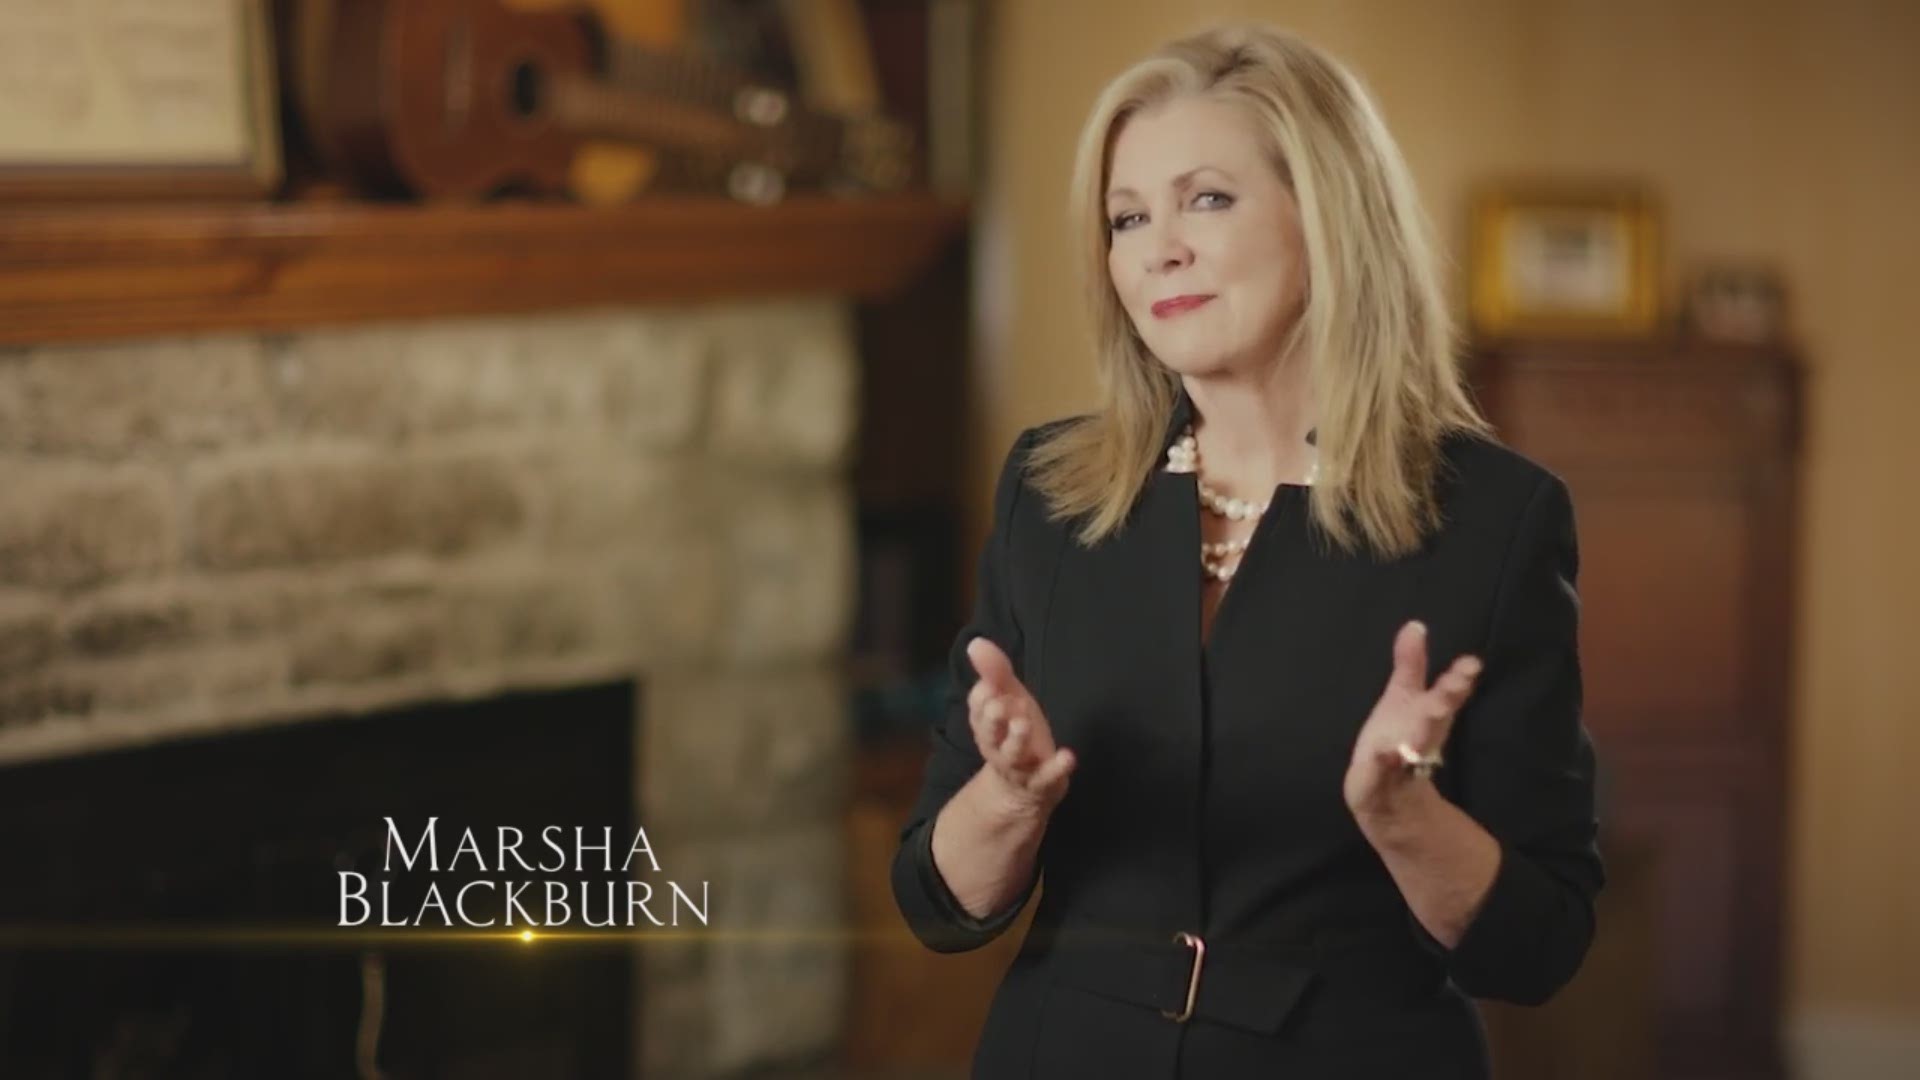 U.S. Rep. Marsha Blackburn, R-Tenn., is entering the 2018 U.S. Senate race to replace retiring Sen. Bob Corker, ending a week's worth of speculation and immediately catapulting her to front-runner status as others consider launching their own bids.